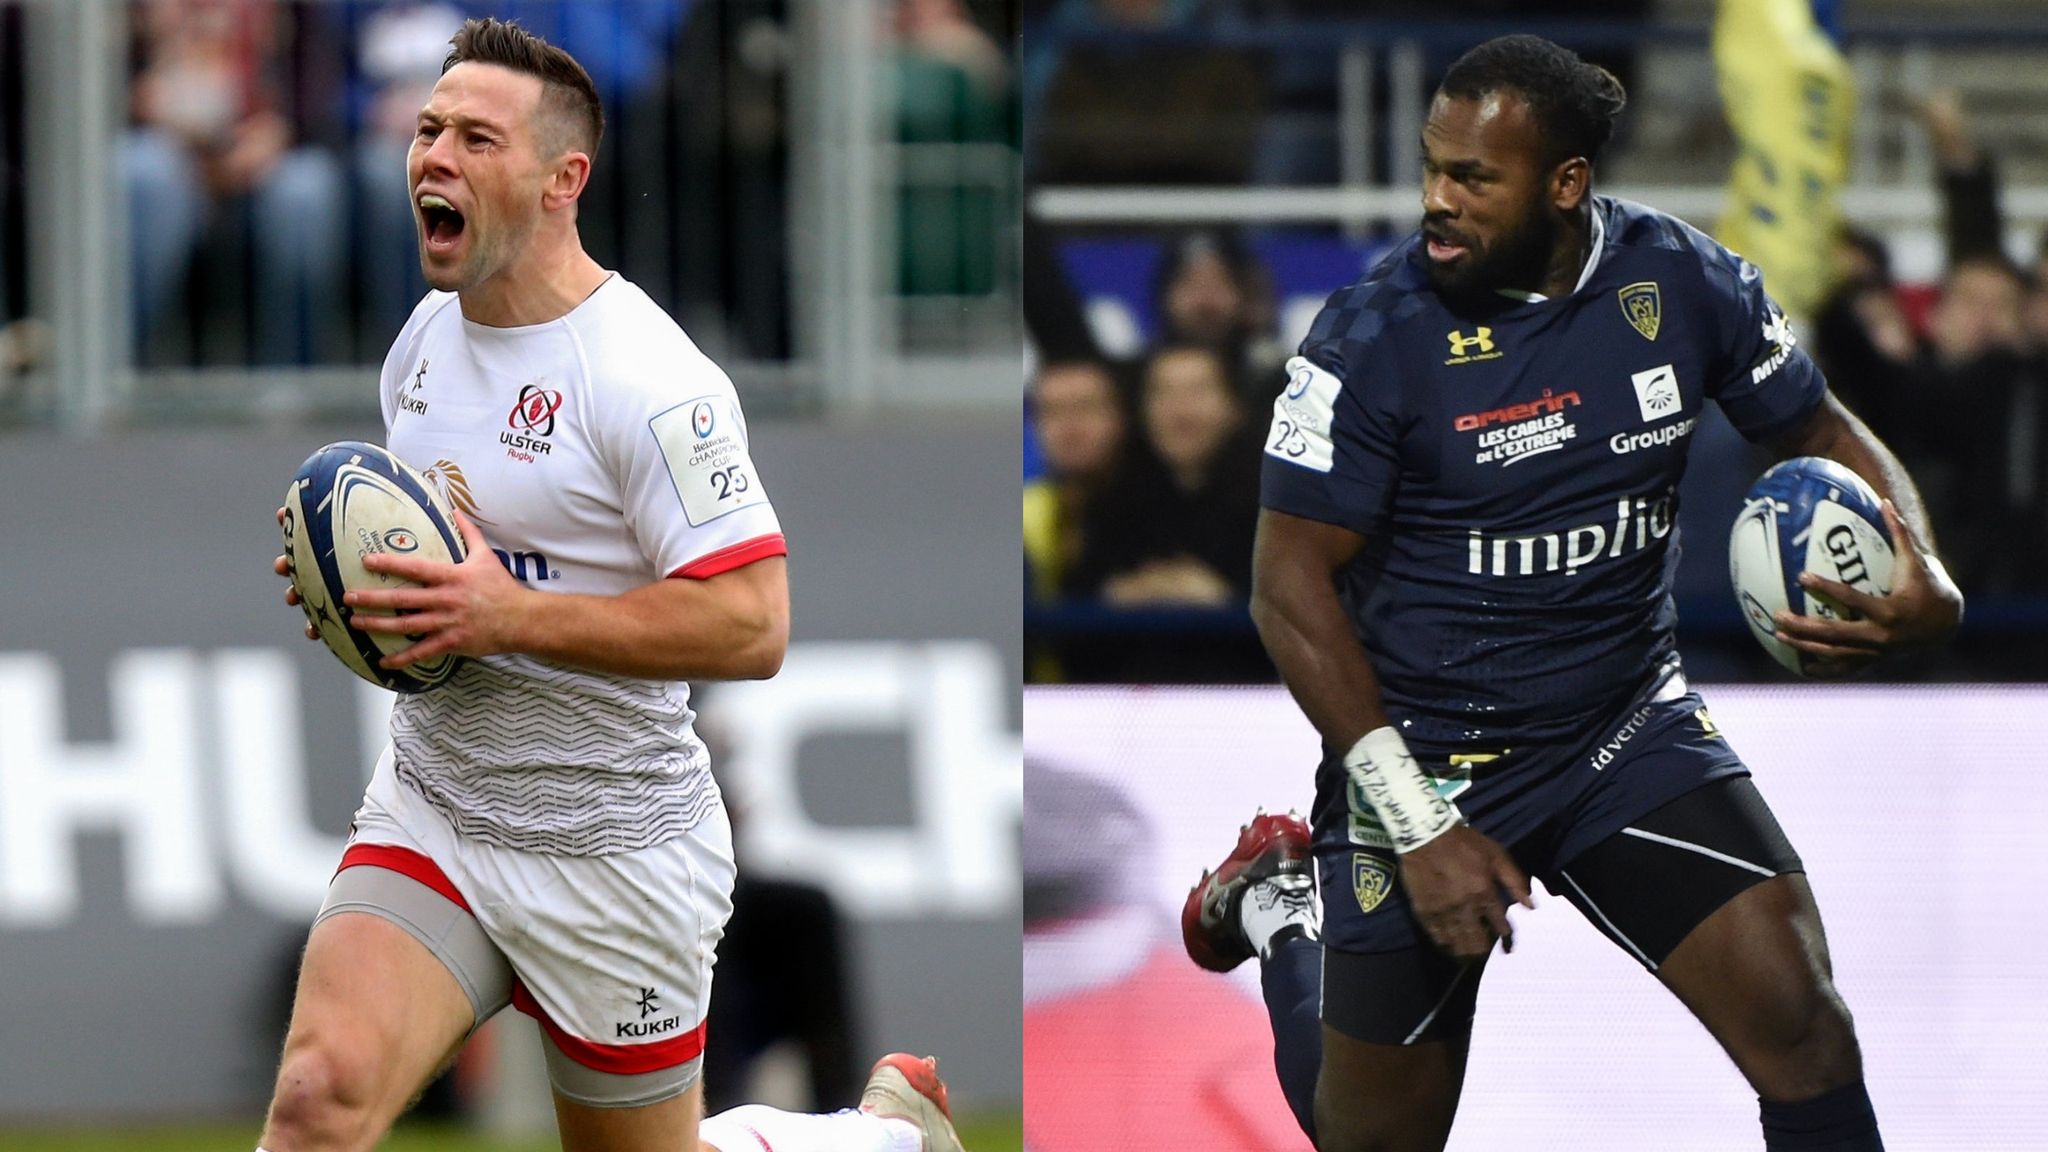 Ulster vs Clermont Key players ahead of Champions Cup Pool 3 clash Rugby Union News Sky Sports